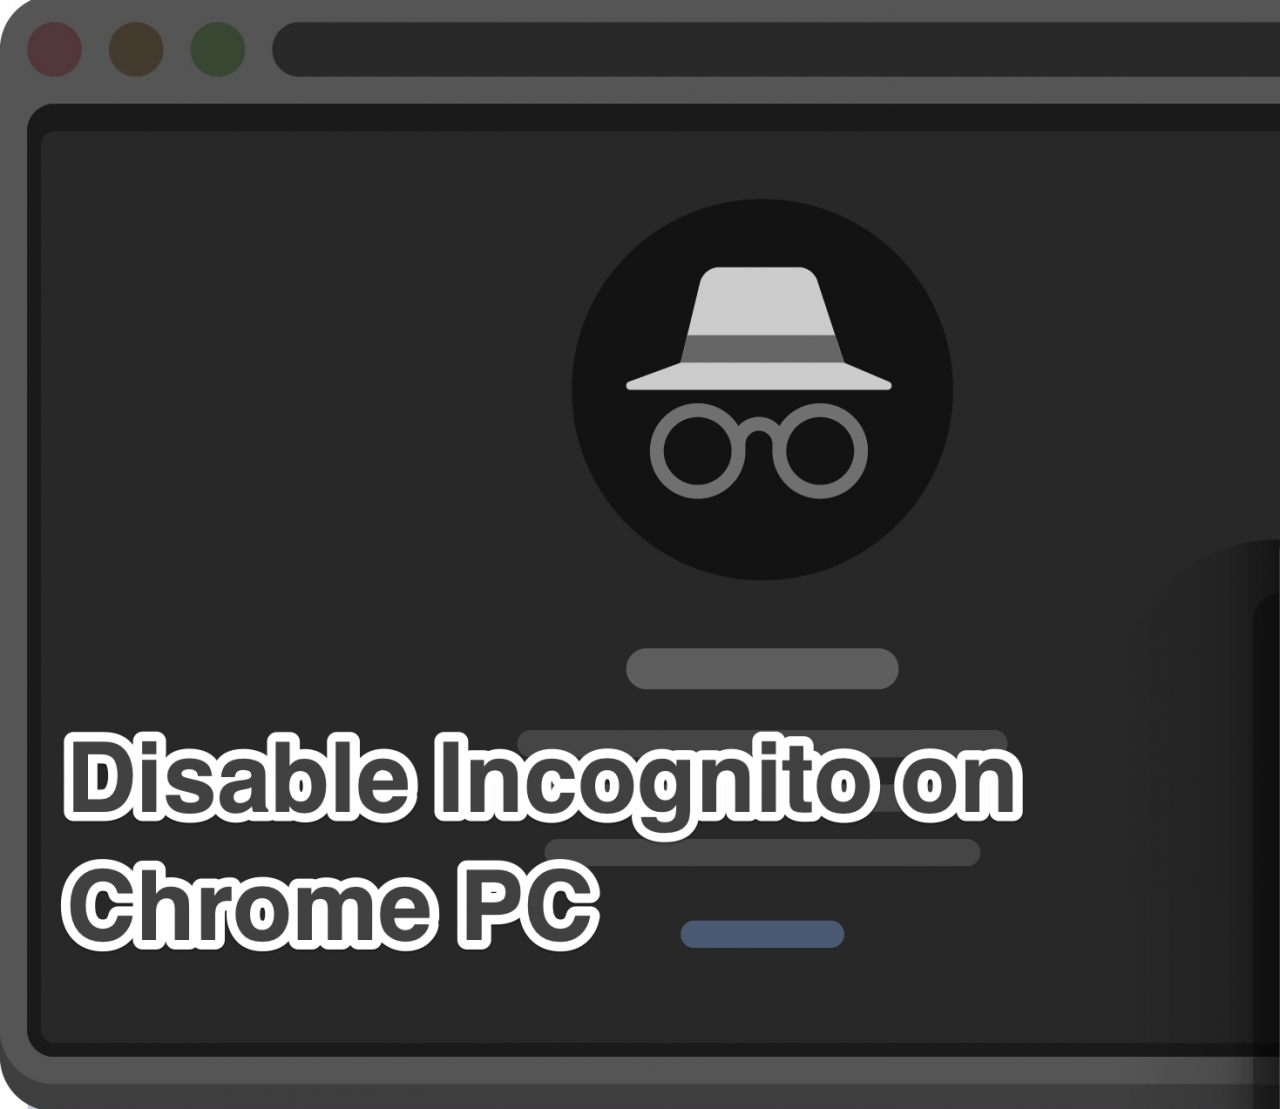 Disable Incognito on Chrome PC